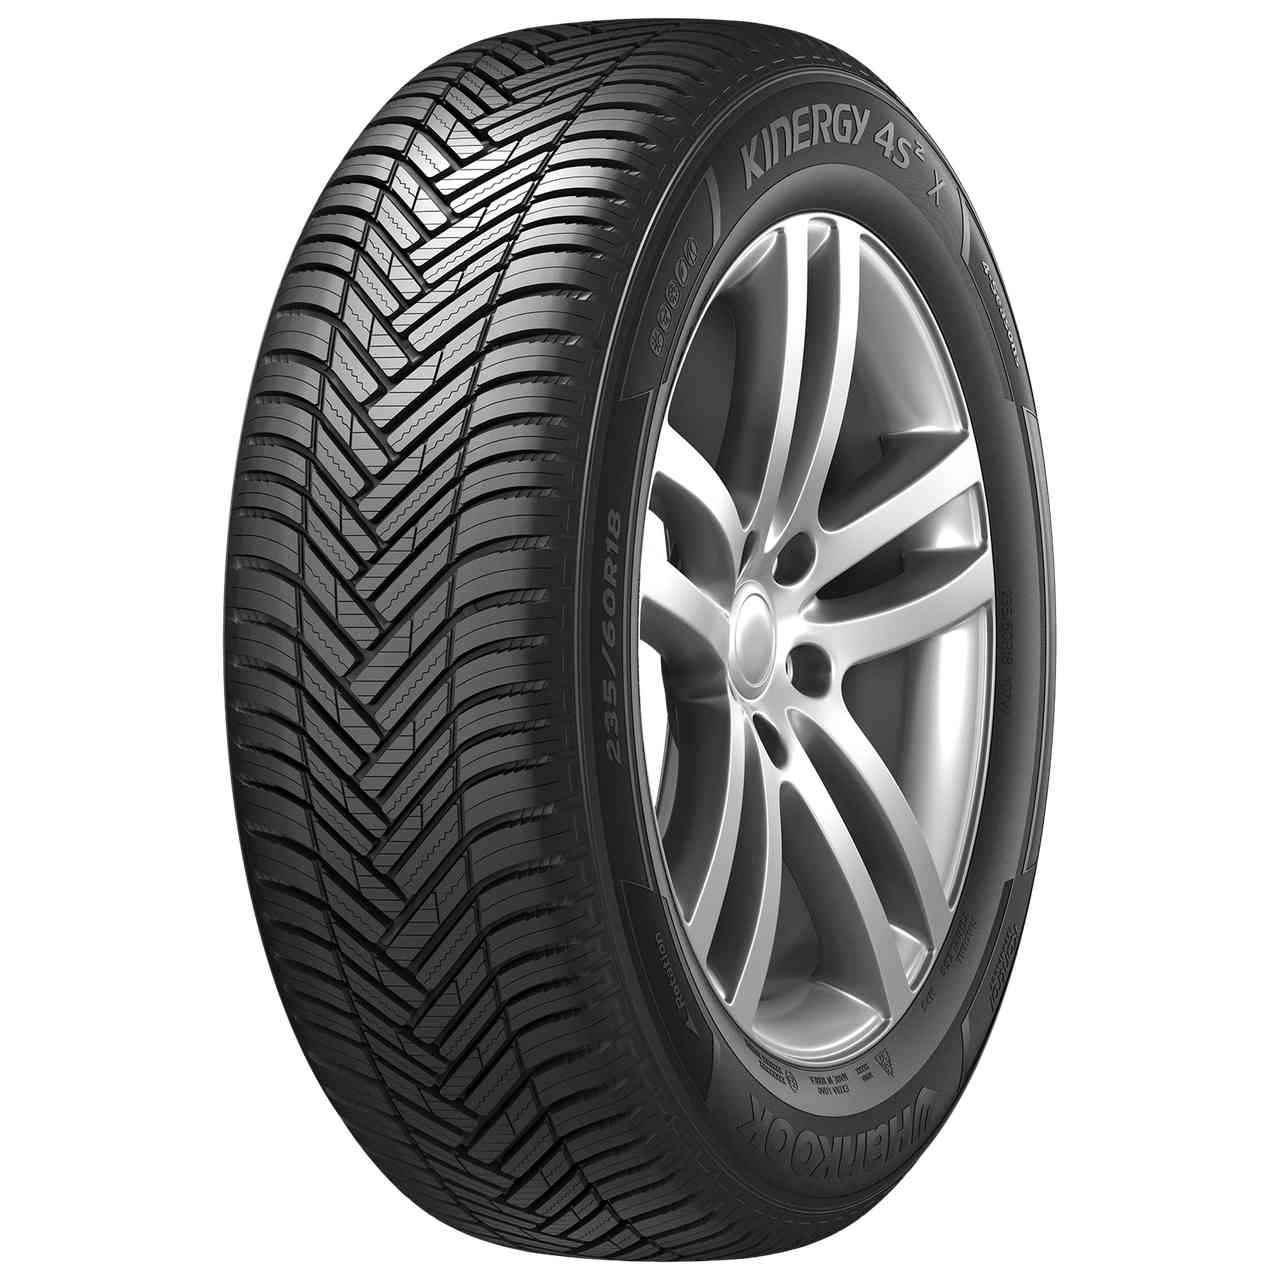 HANKOOK KINERGY 4S 2 X (H750A) 235/60R18 107W BSW